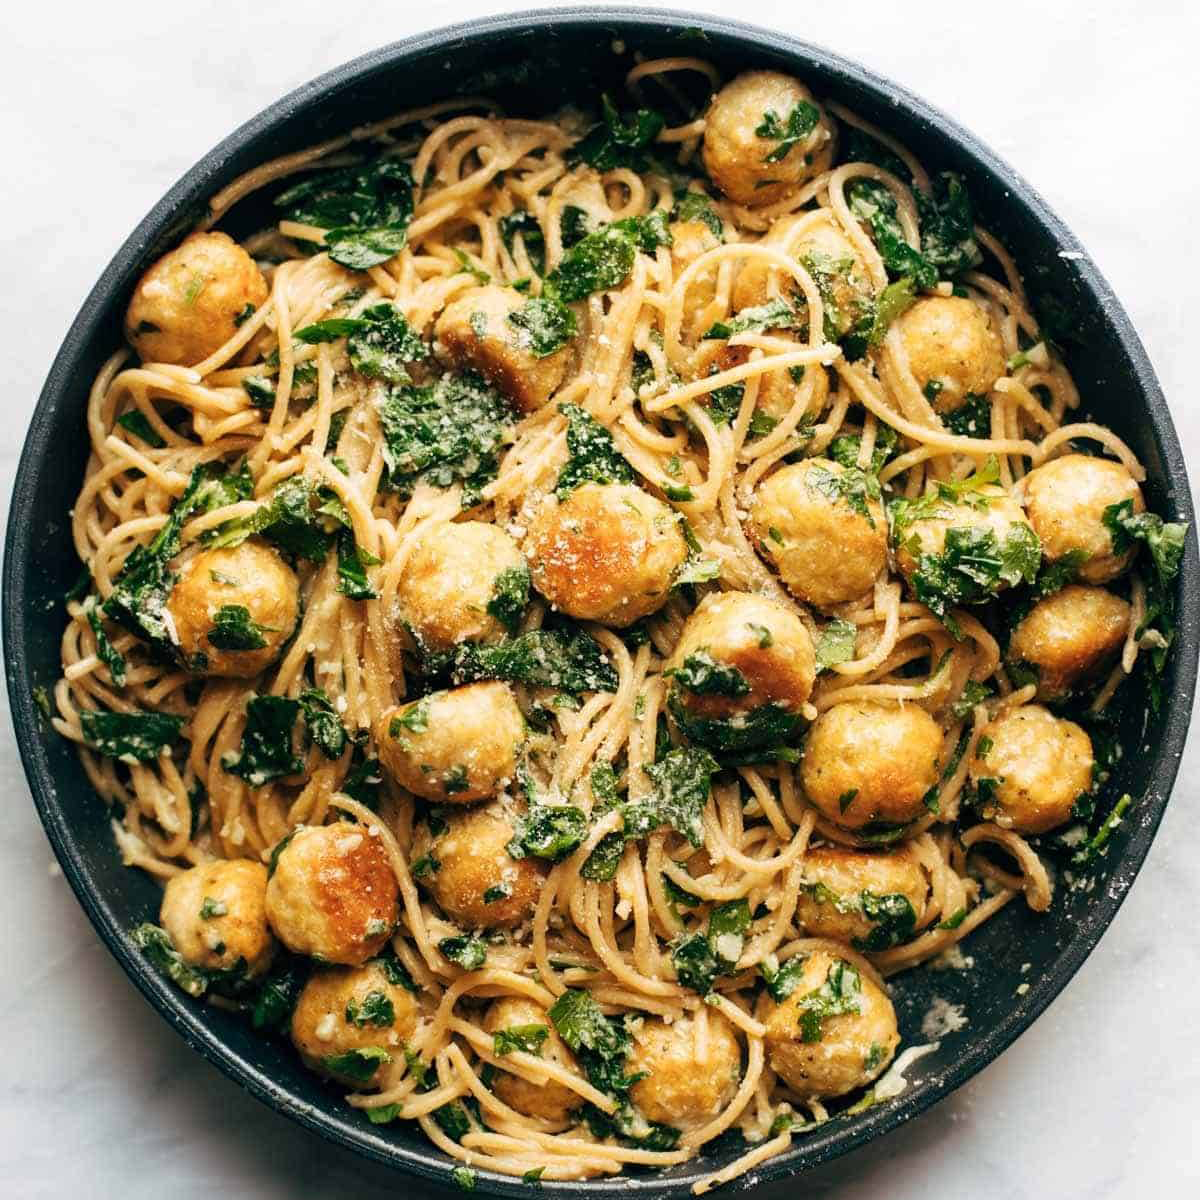 Bowl full of pasta and meatballs sprinkled with cheese, garlic, and herbs.